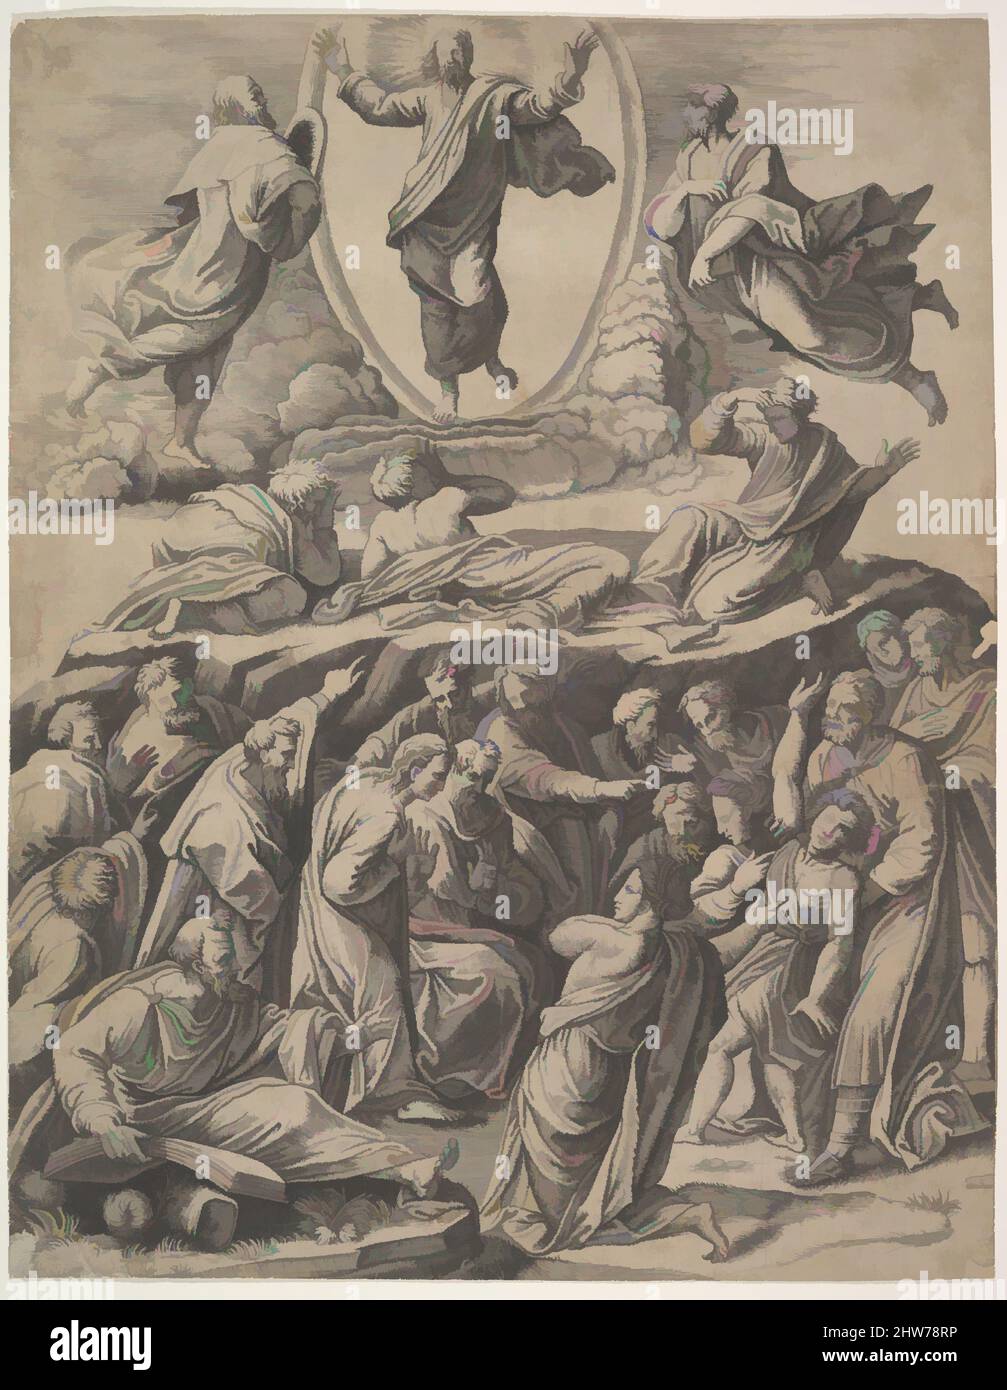 Art inspired by The Transfiguration of Christ who appears upper centre, below him various figures including the Apostles, 1530–60, Engraving, sheet: 15 9/16 x 12 in. (39.5 x 30.5 cm), Prints, Master of the Die (Italian, active Rome, ca. 1530–60), After Raphael (Raffaello Sanzio or, Classic works modernized by Artotop with a splash of modernity. Shapes, color and value, eye-catching visual impact on art. Emotions through freedom of artworks in a contemporary way. A timeless message pursuing a wildly creative new direction. Artists turning to the digital medium and creating the Artotop NFT Stock Photo